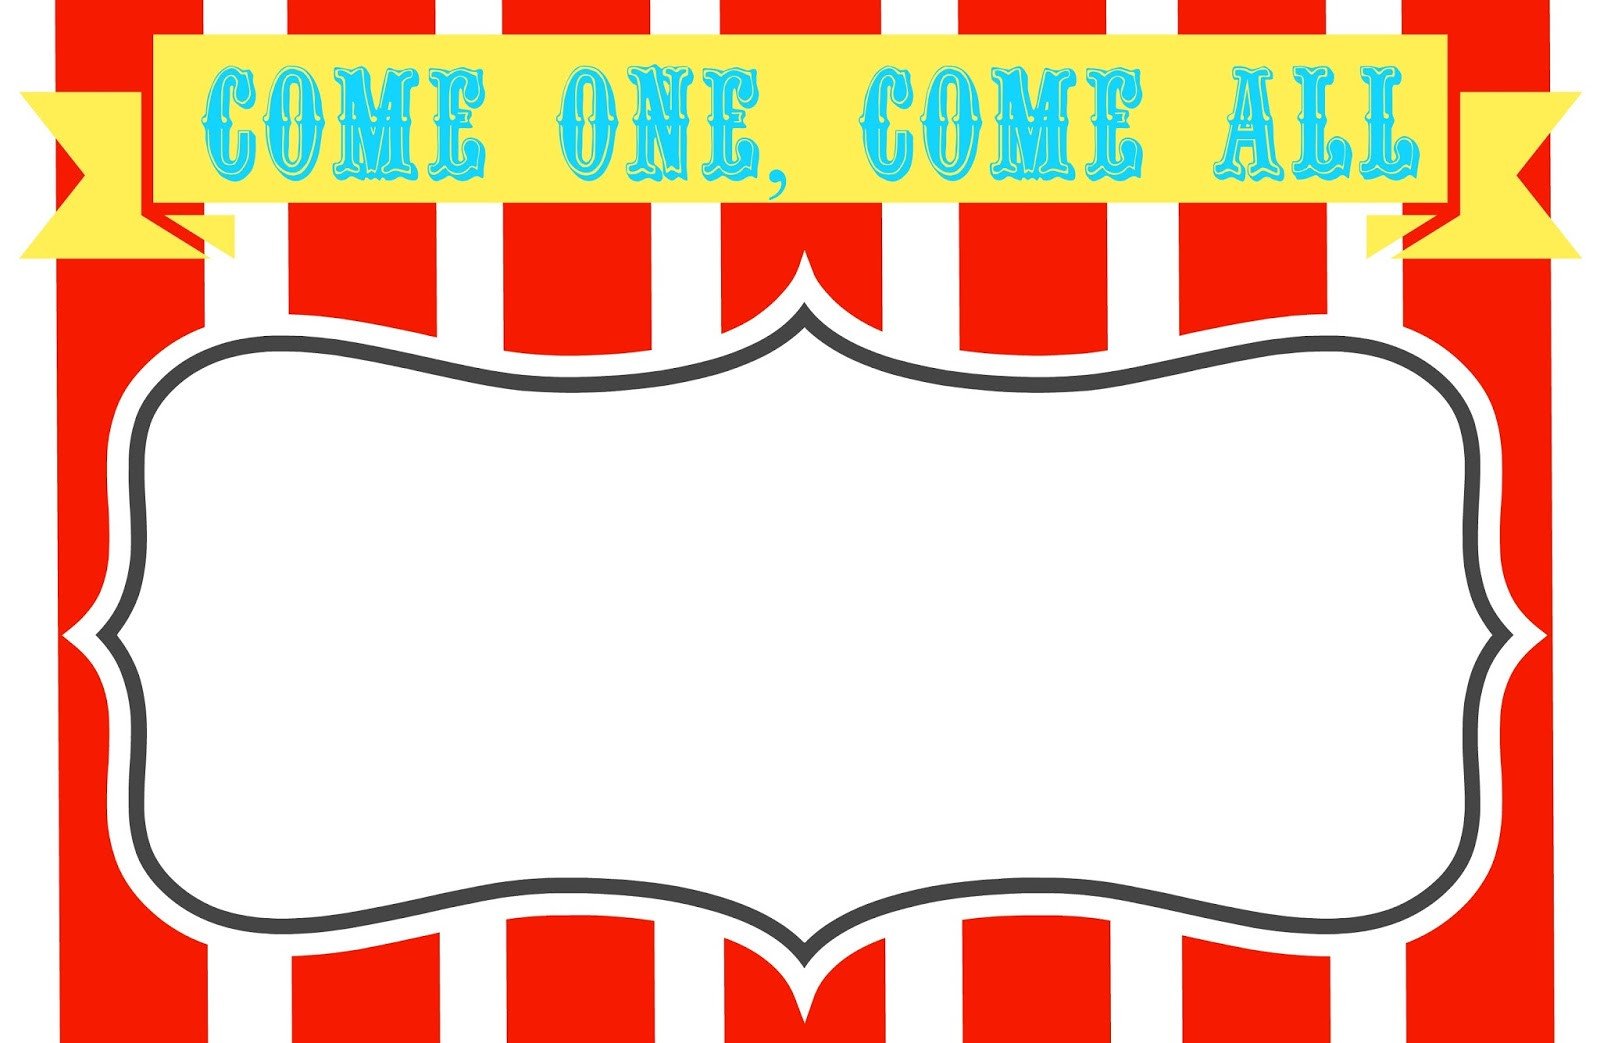 Blank Circus Invitations Templates Free ClipArt Best